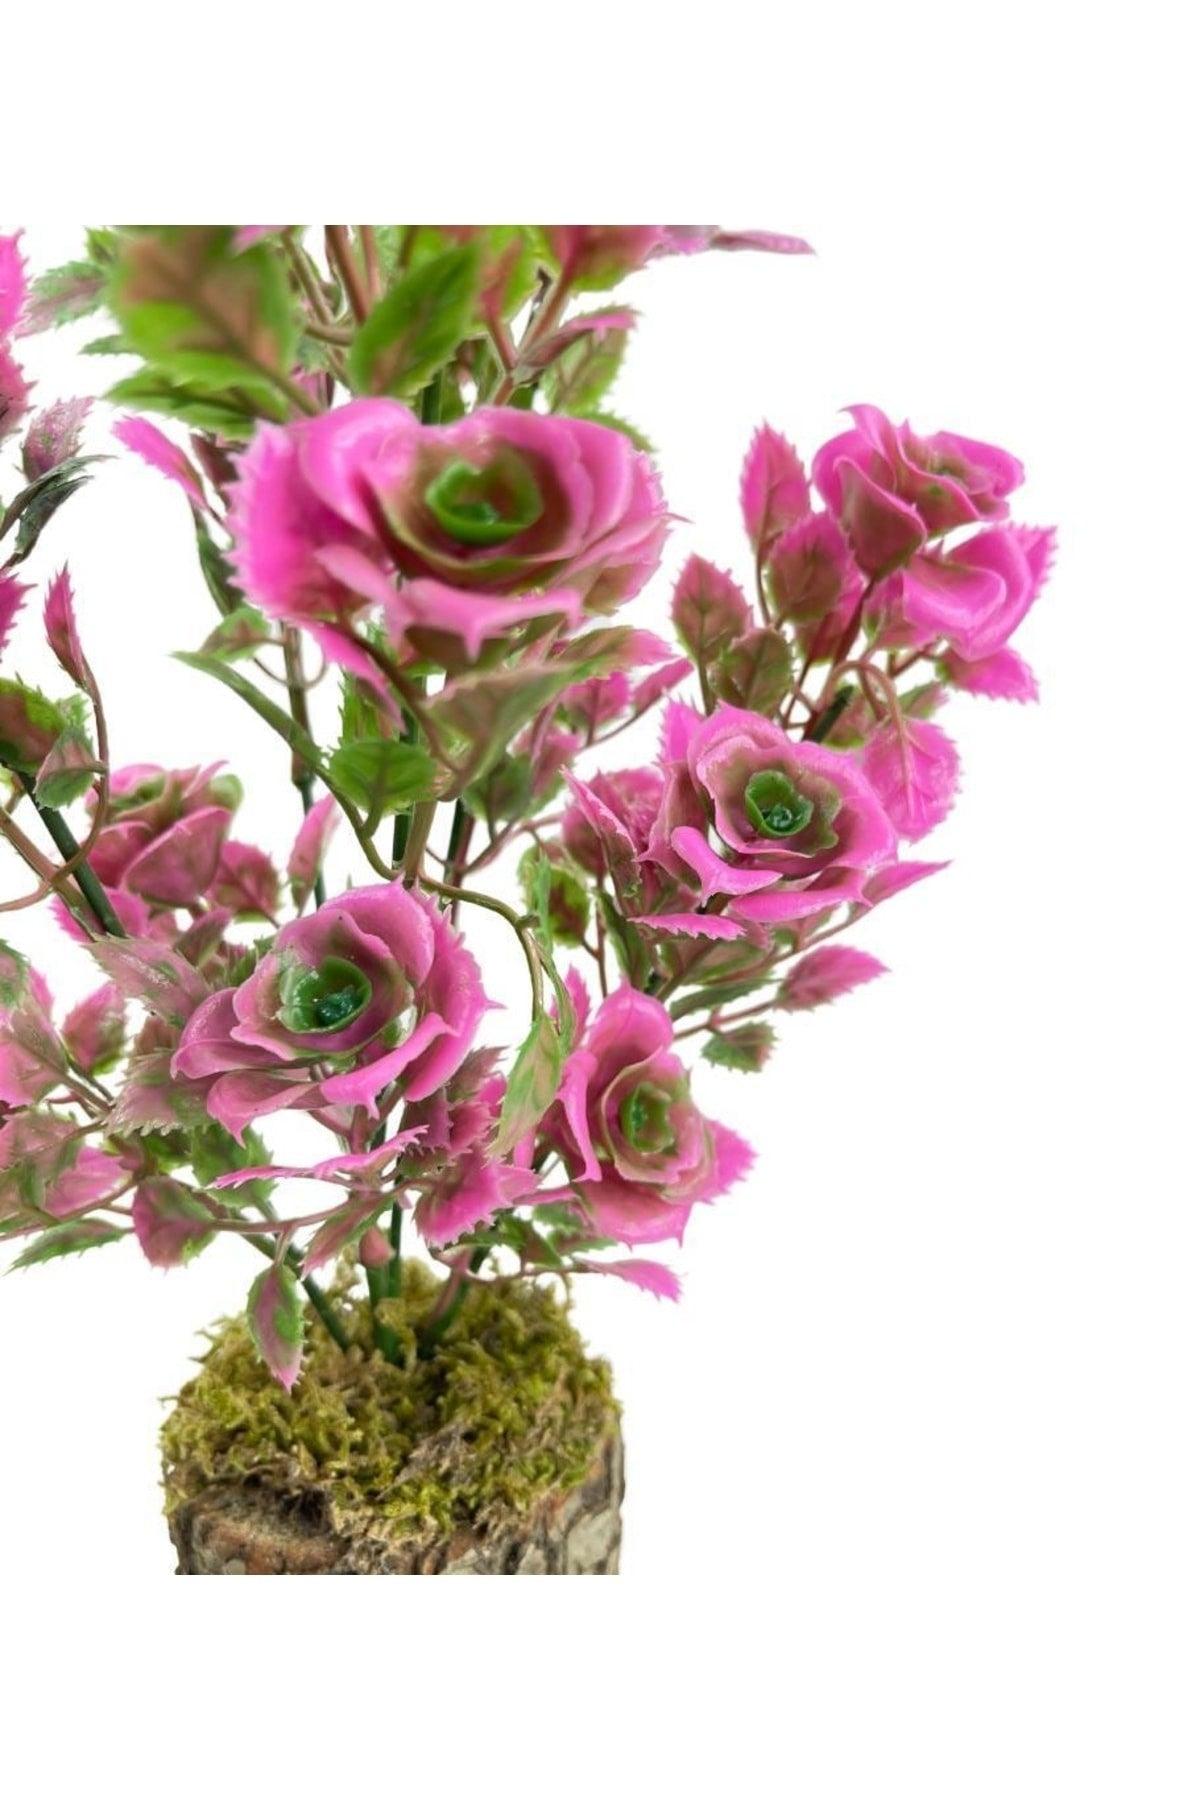 Artificial Flowers Decorative Table Flower With Pink Green Leaves On A Log 30*20cm - Swordslife